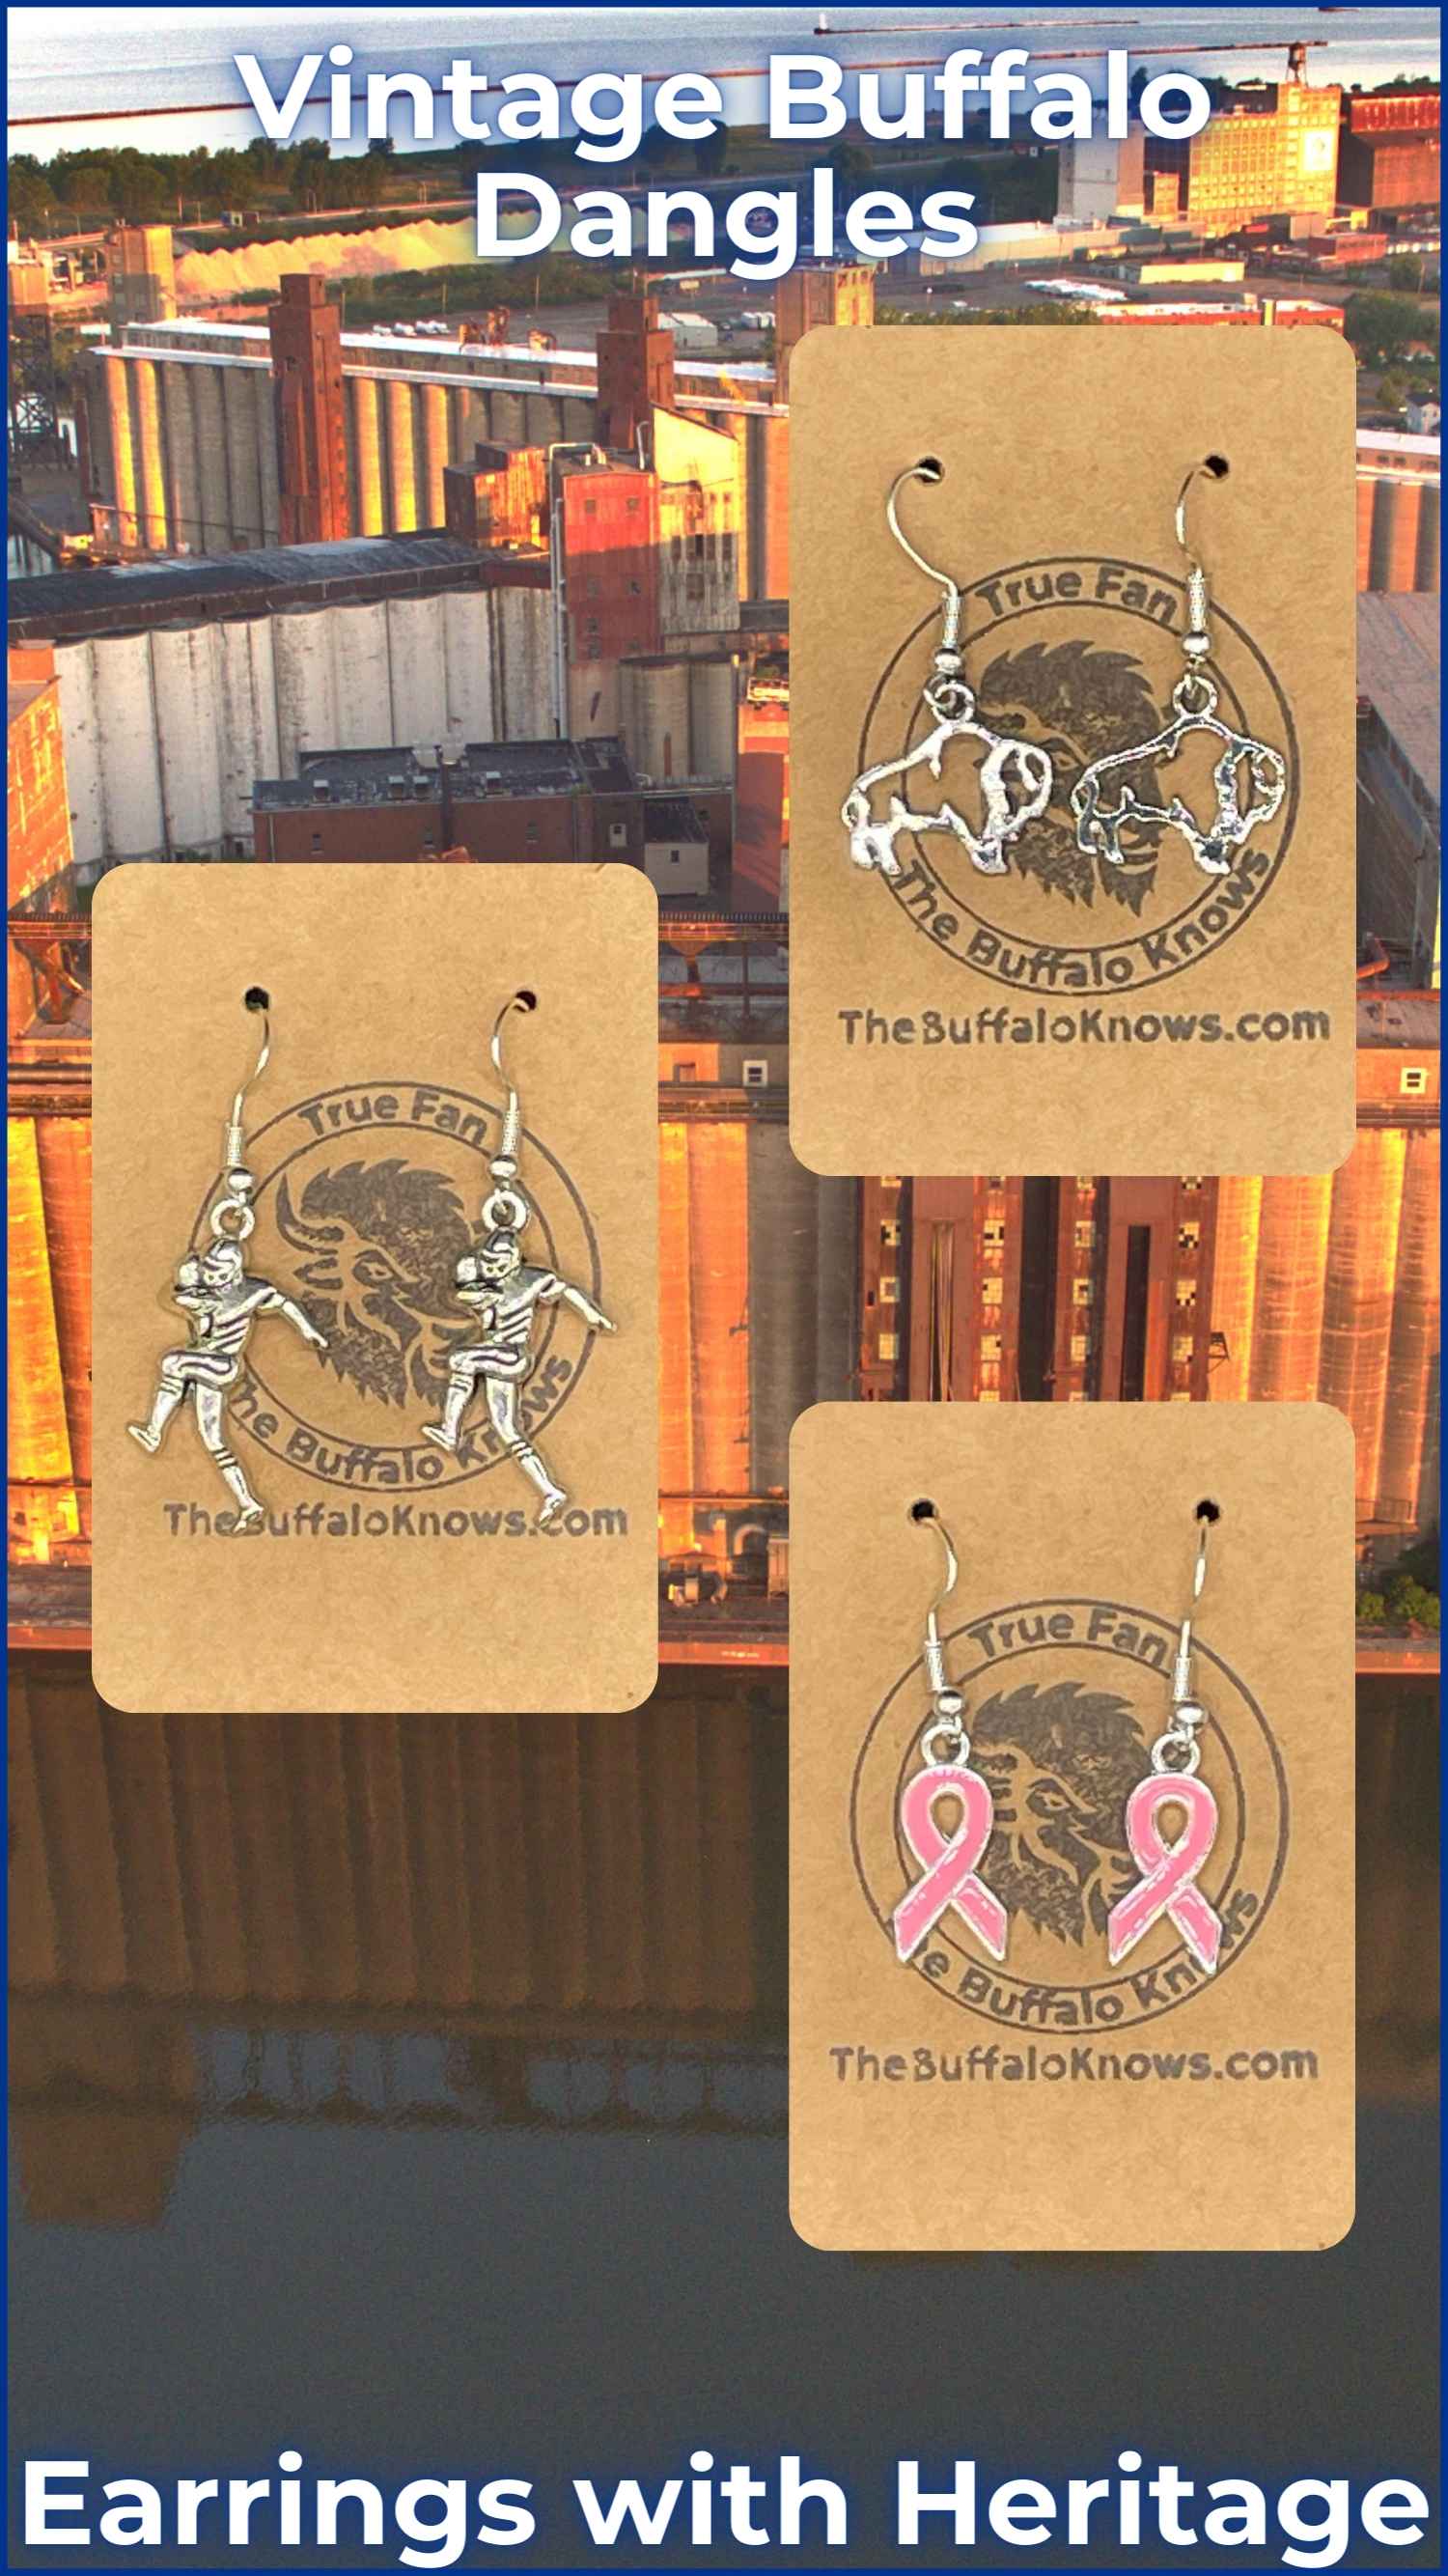 An array of Buffalo Bills Earrings titled 'Vintage Buffalo Dangles', including football and pink ribbon designs, perfect as unique Bills gifts for accessorizing on game days and beyond